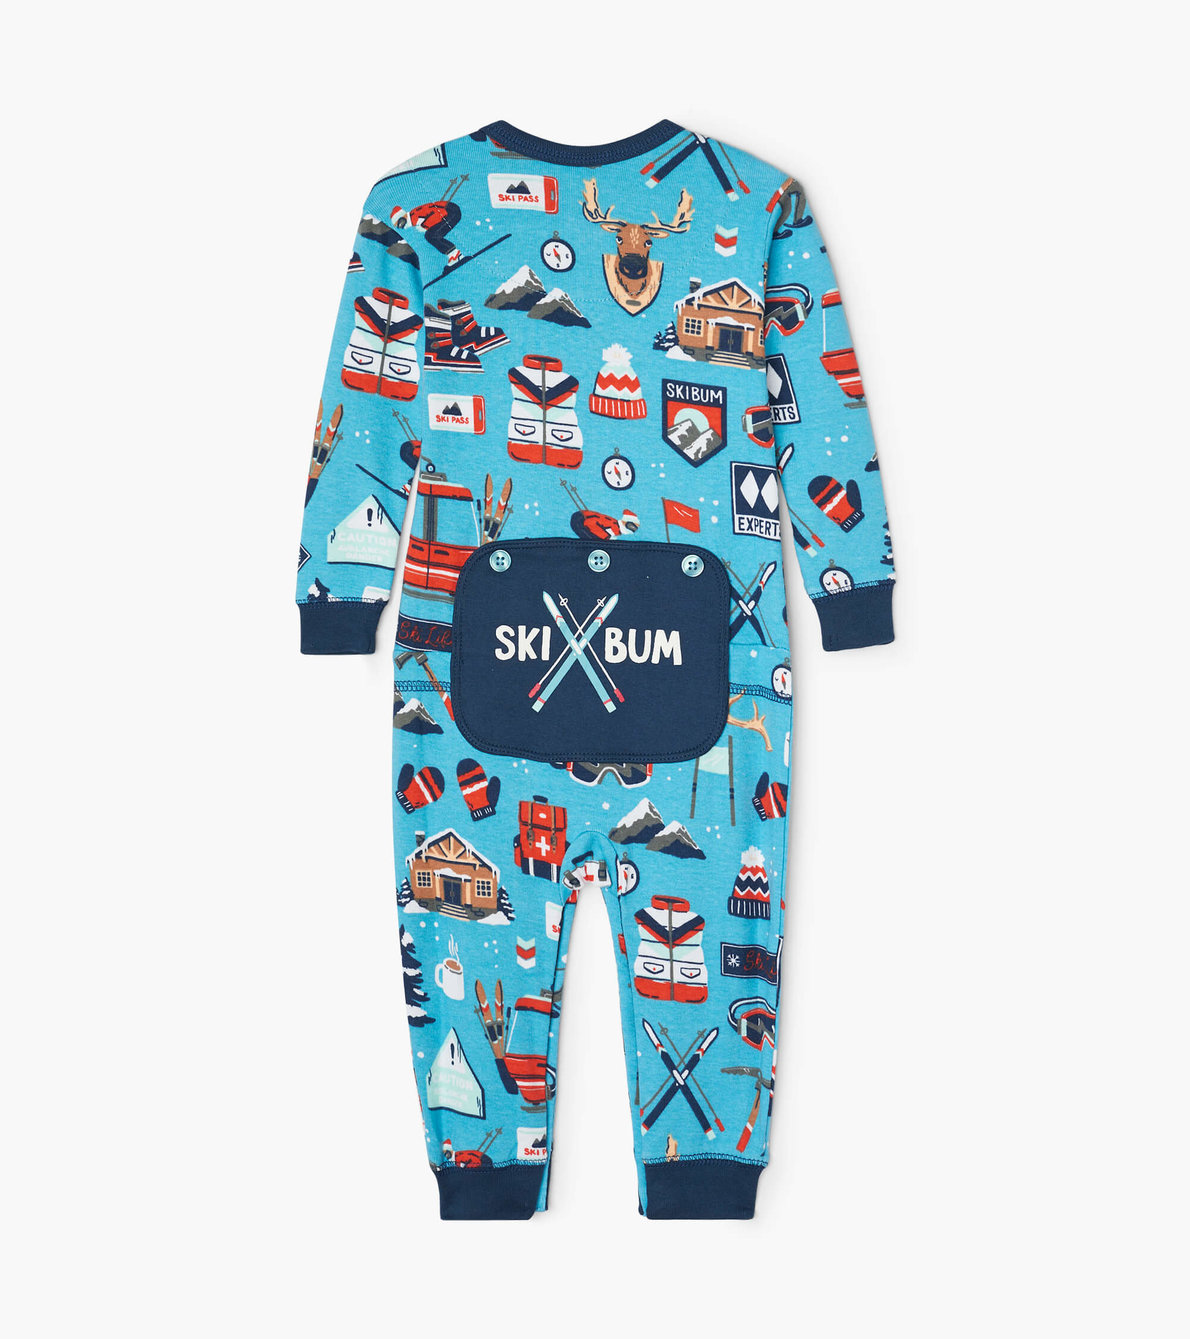 View larger image of Ski Holiday Baby Union Suit